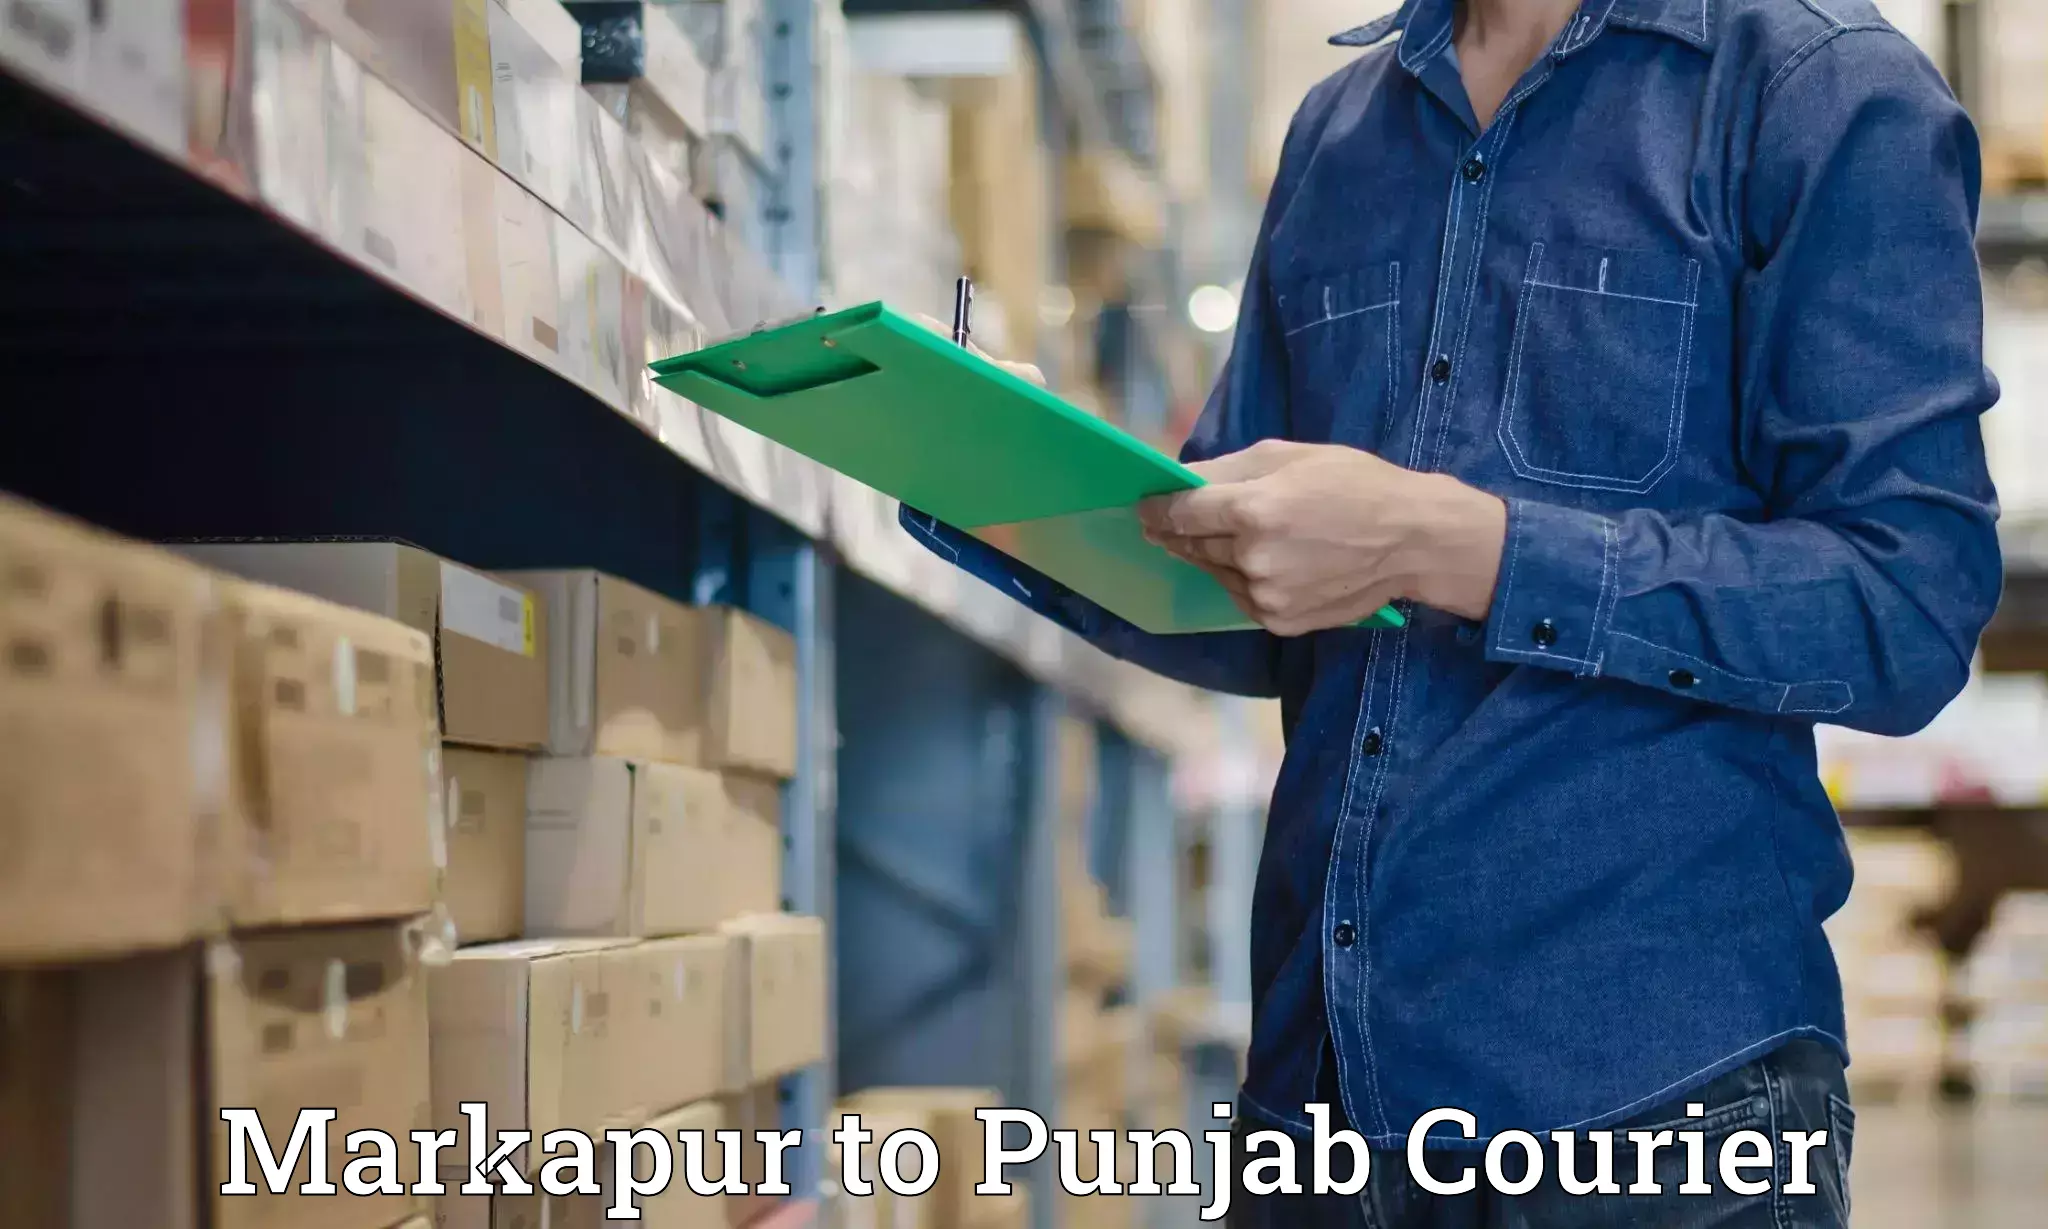 User-friendly delivery service Markapur to Punjab